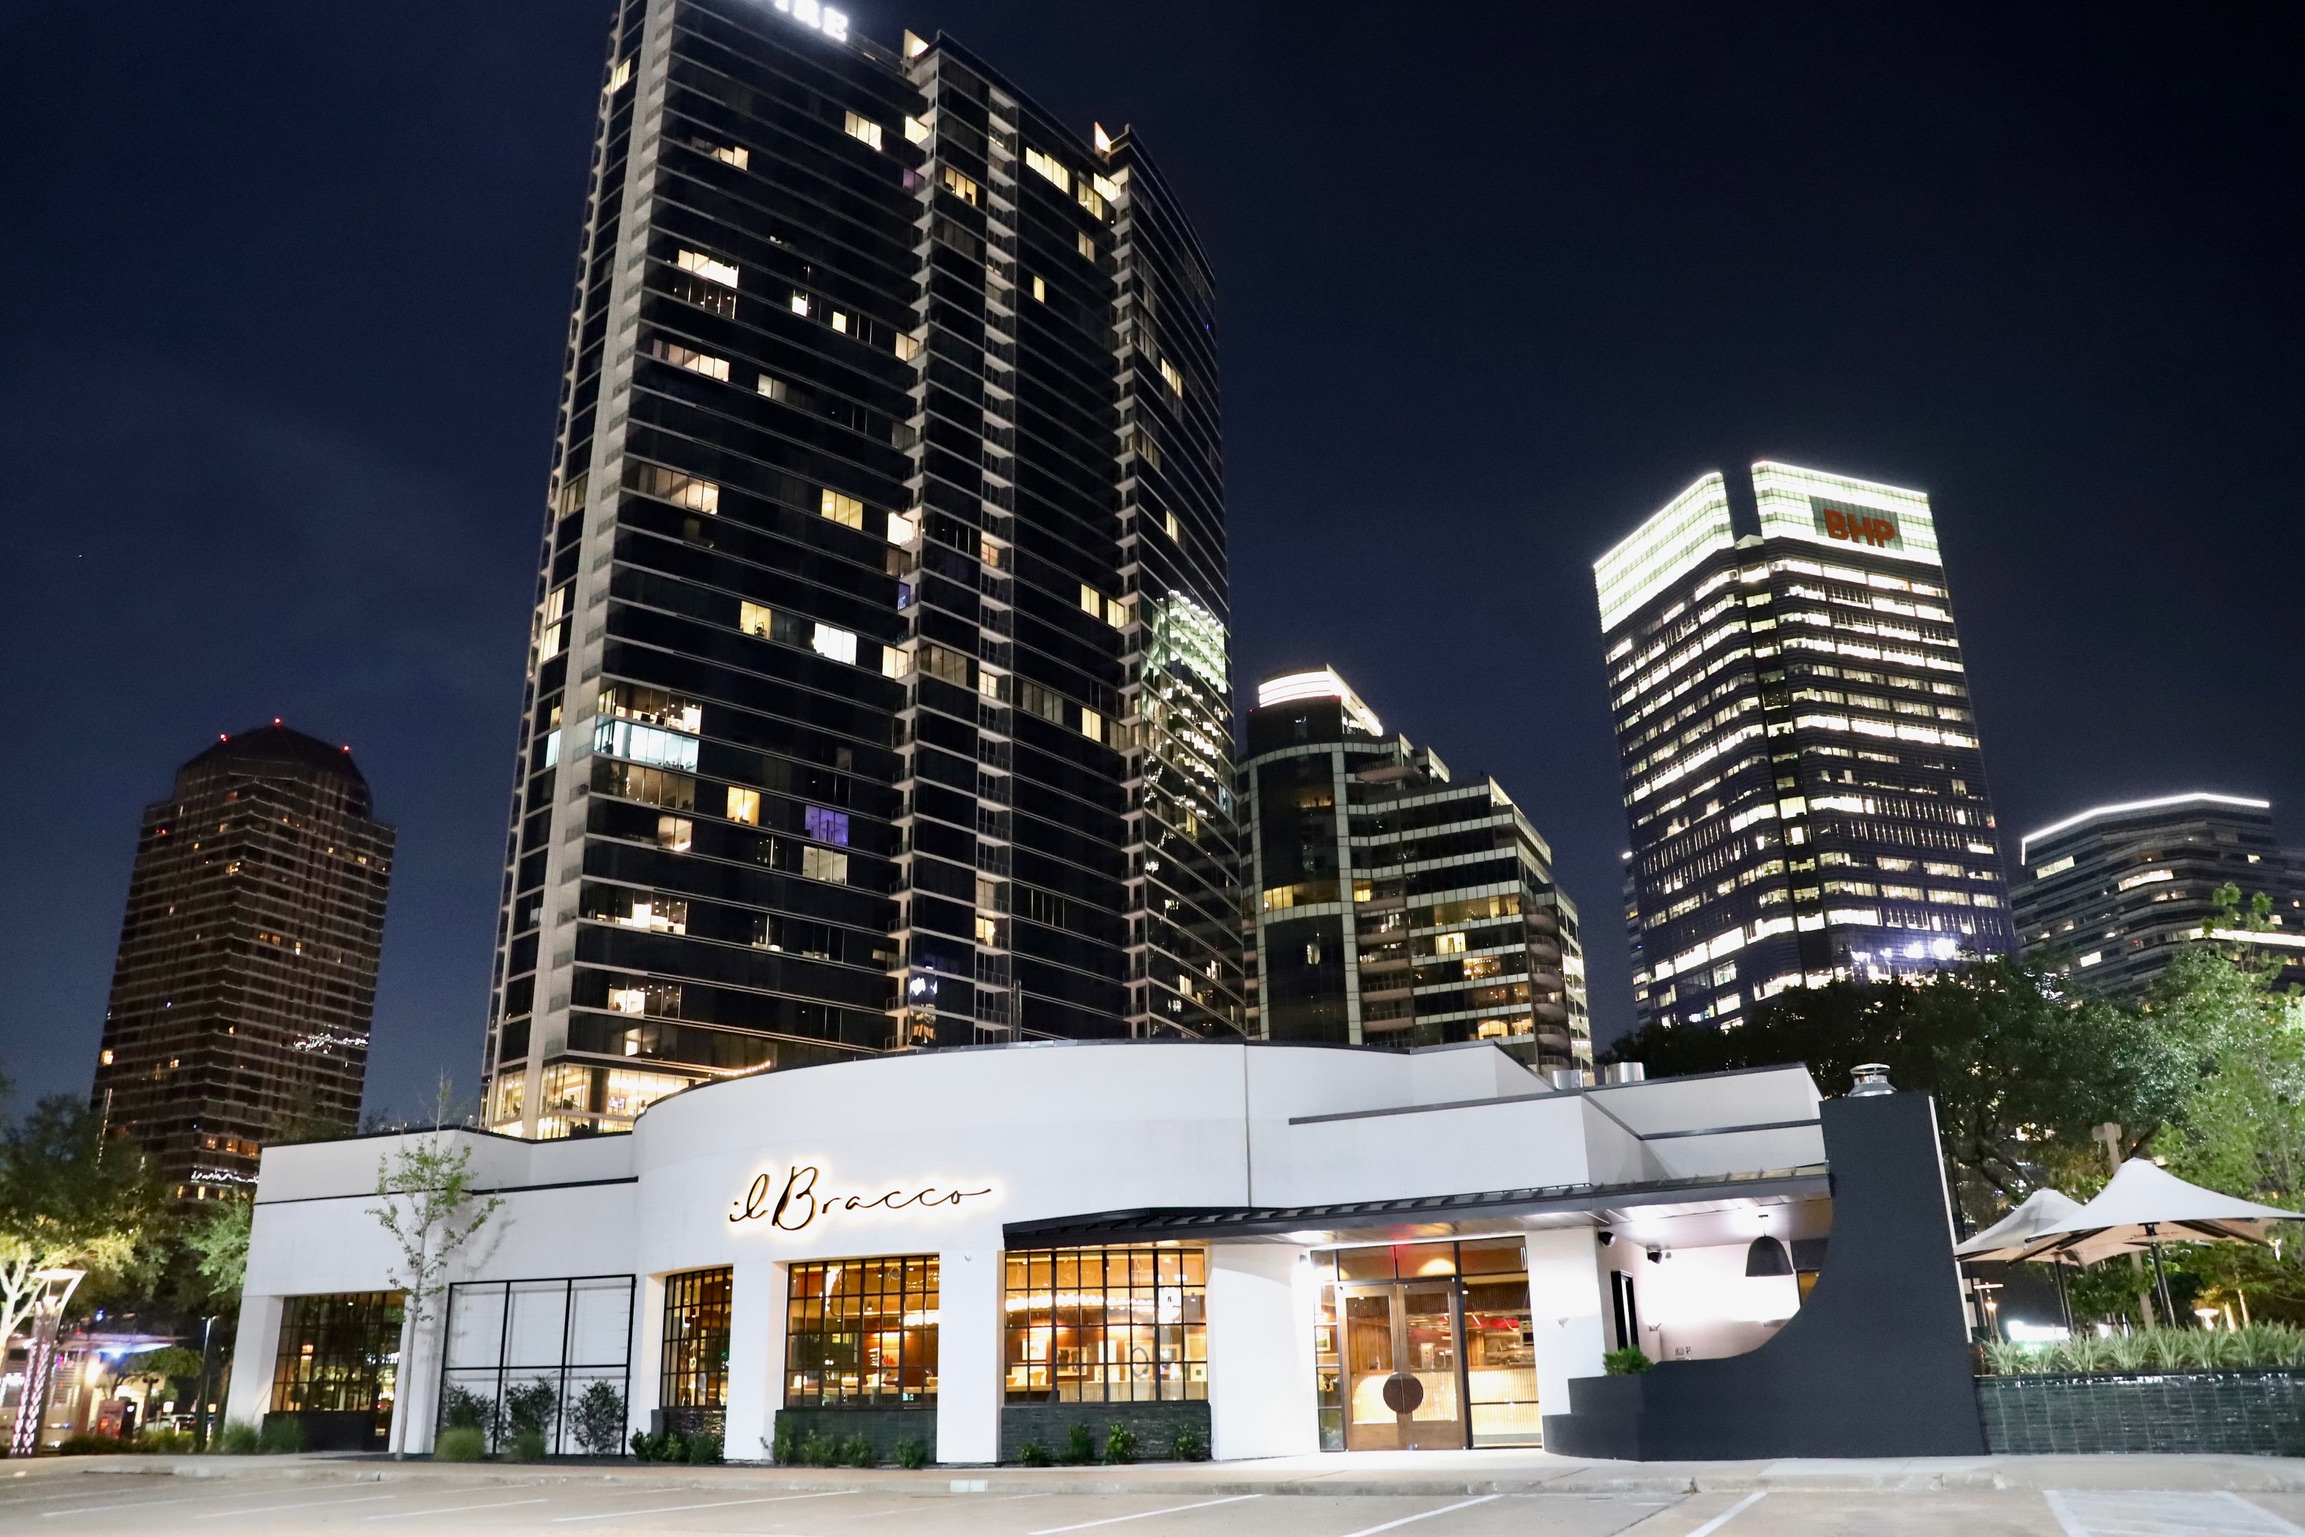 Il Bracco’s exterior lit up against the night sky.